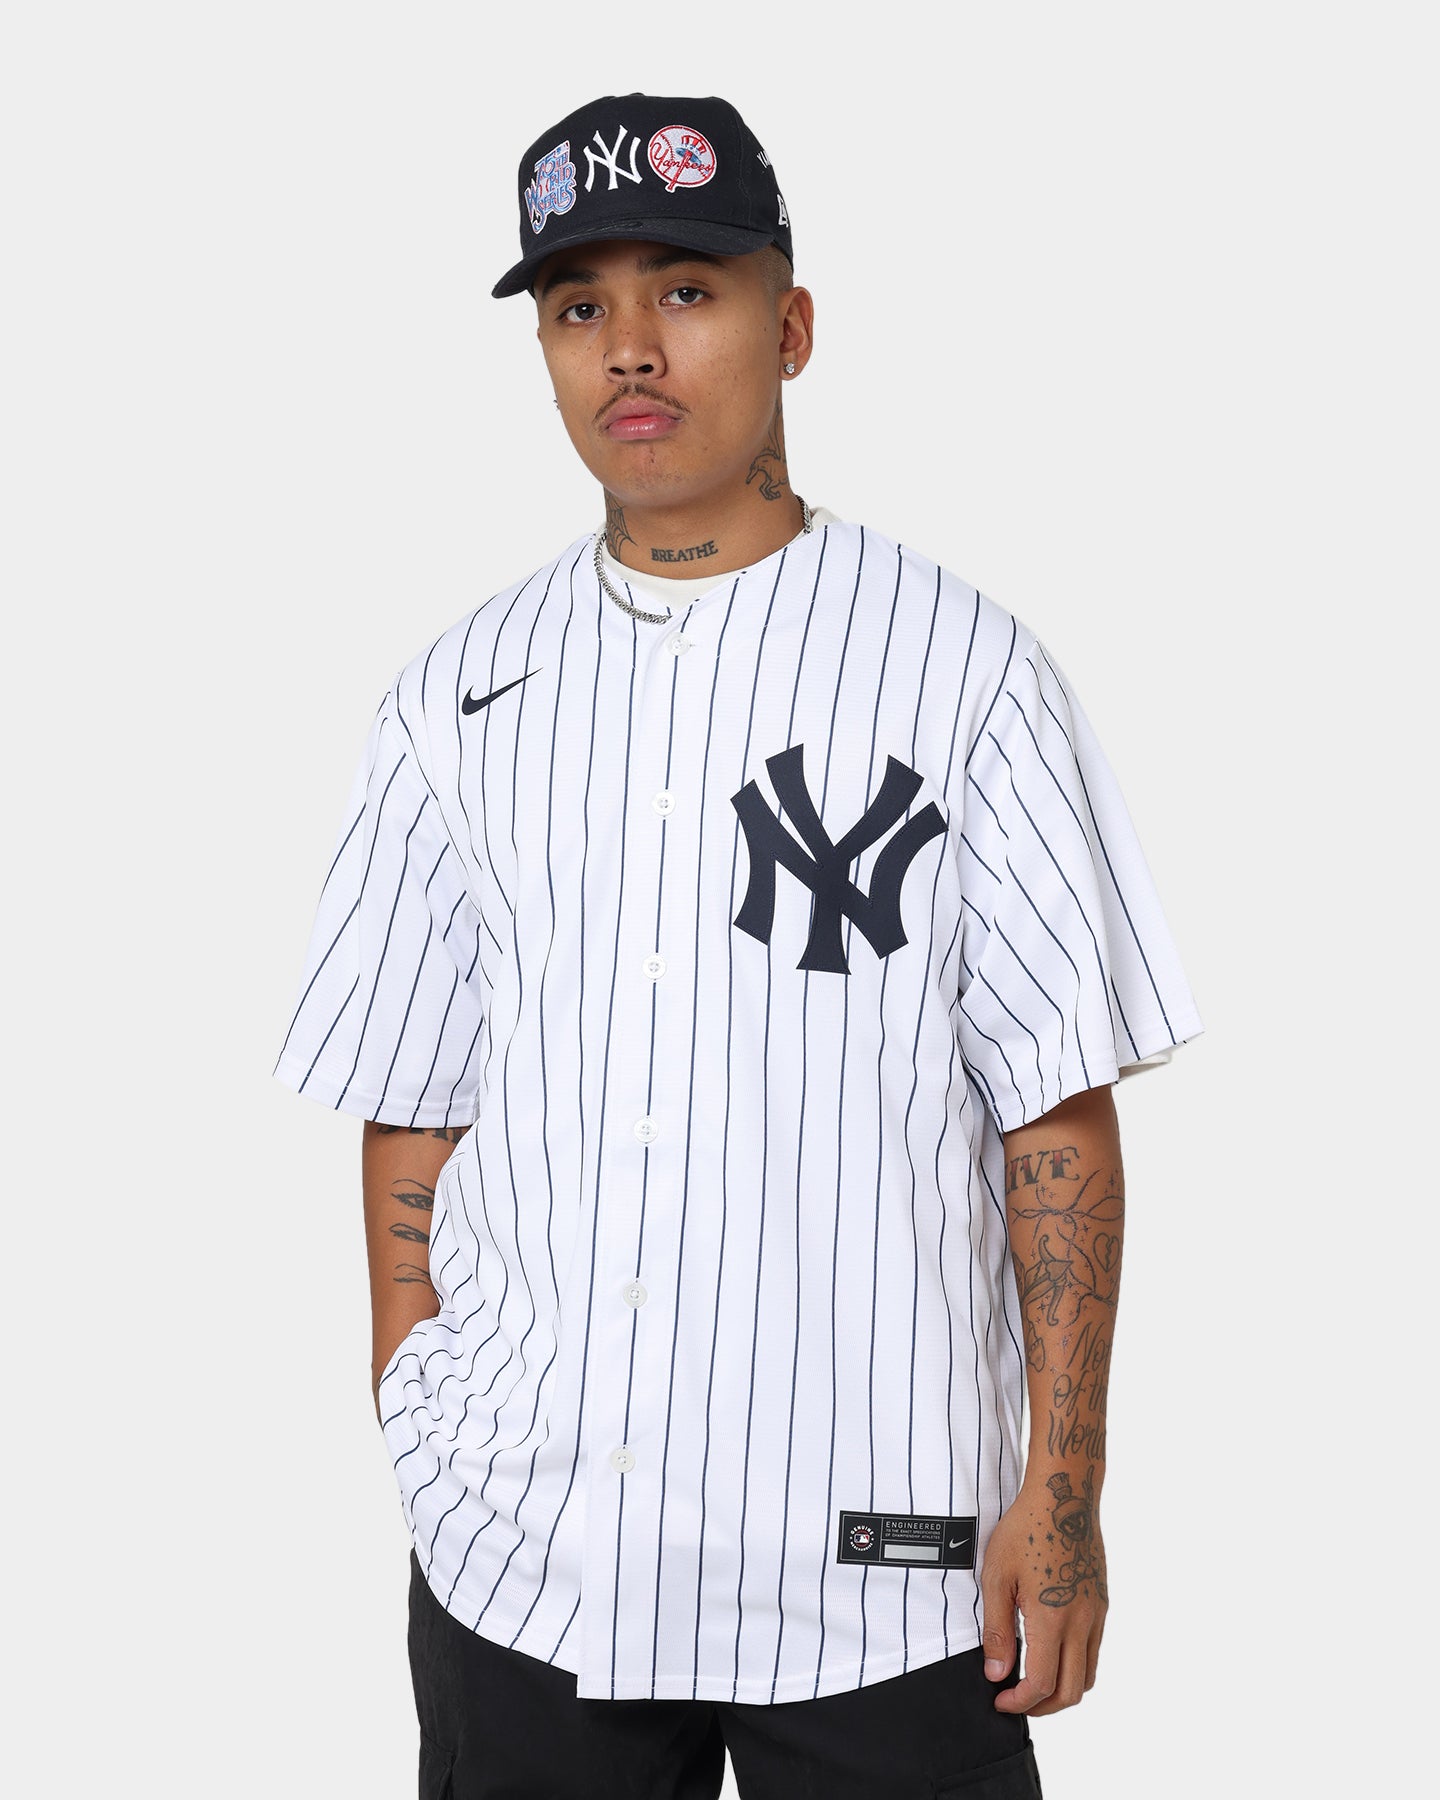 Pets First MLB New York Yankees Mesh Jersey for Dogs and Cats  Licensed  Soft PolyCotton Sports Jersey  XXXLarge  Walmartcom